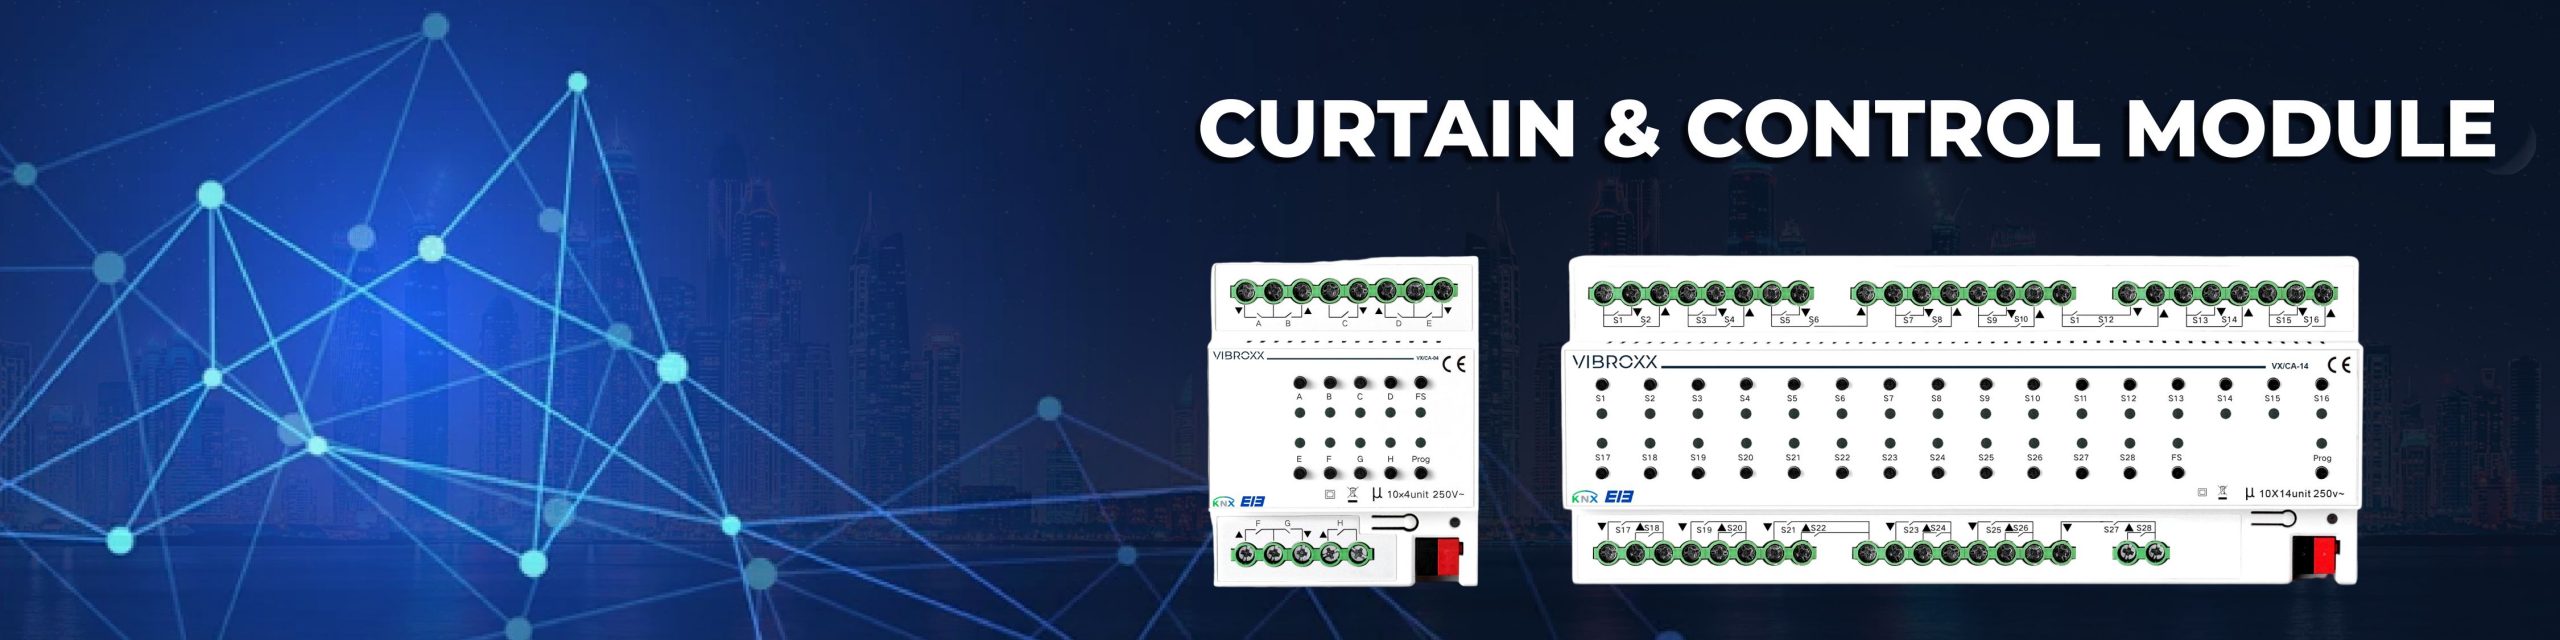 Curtain And Control Module